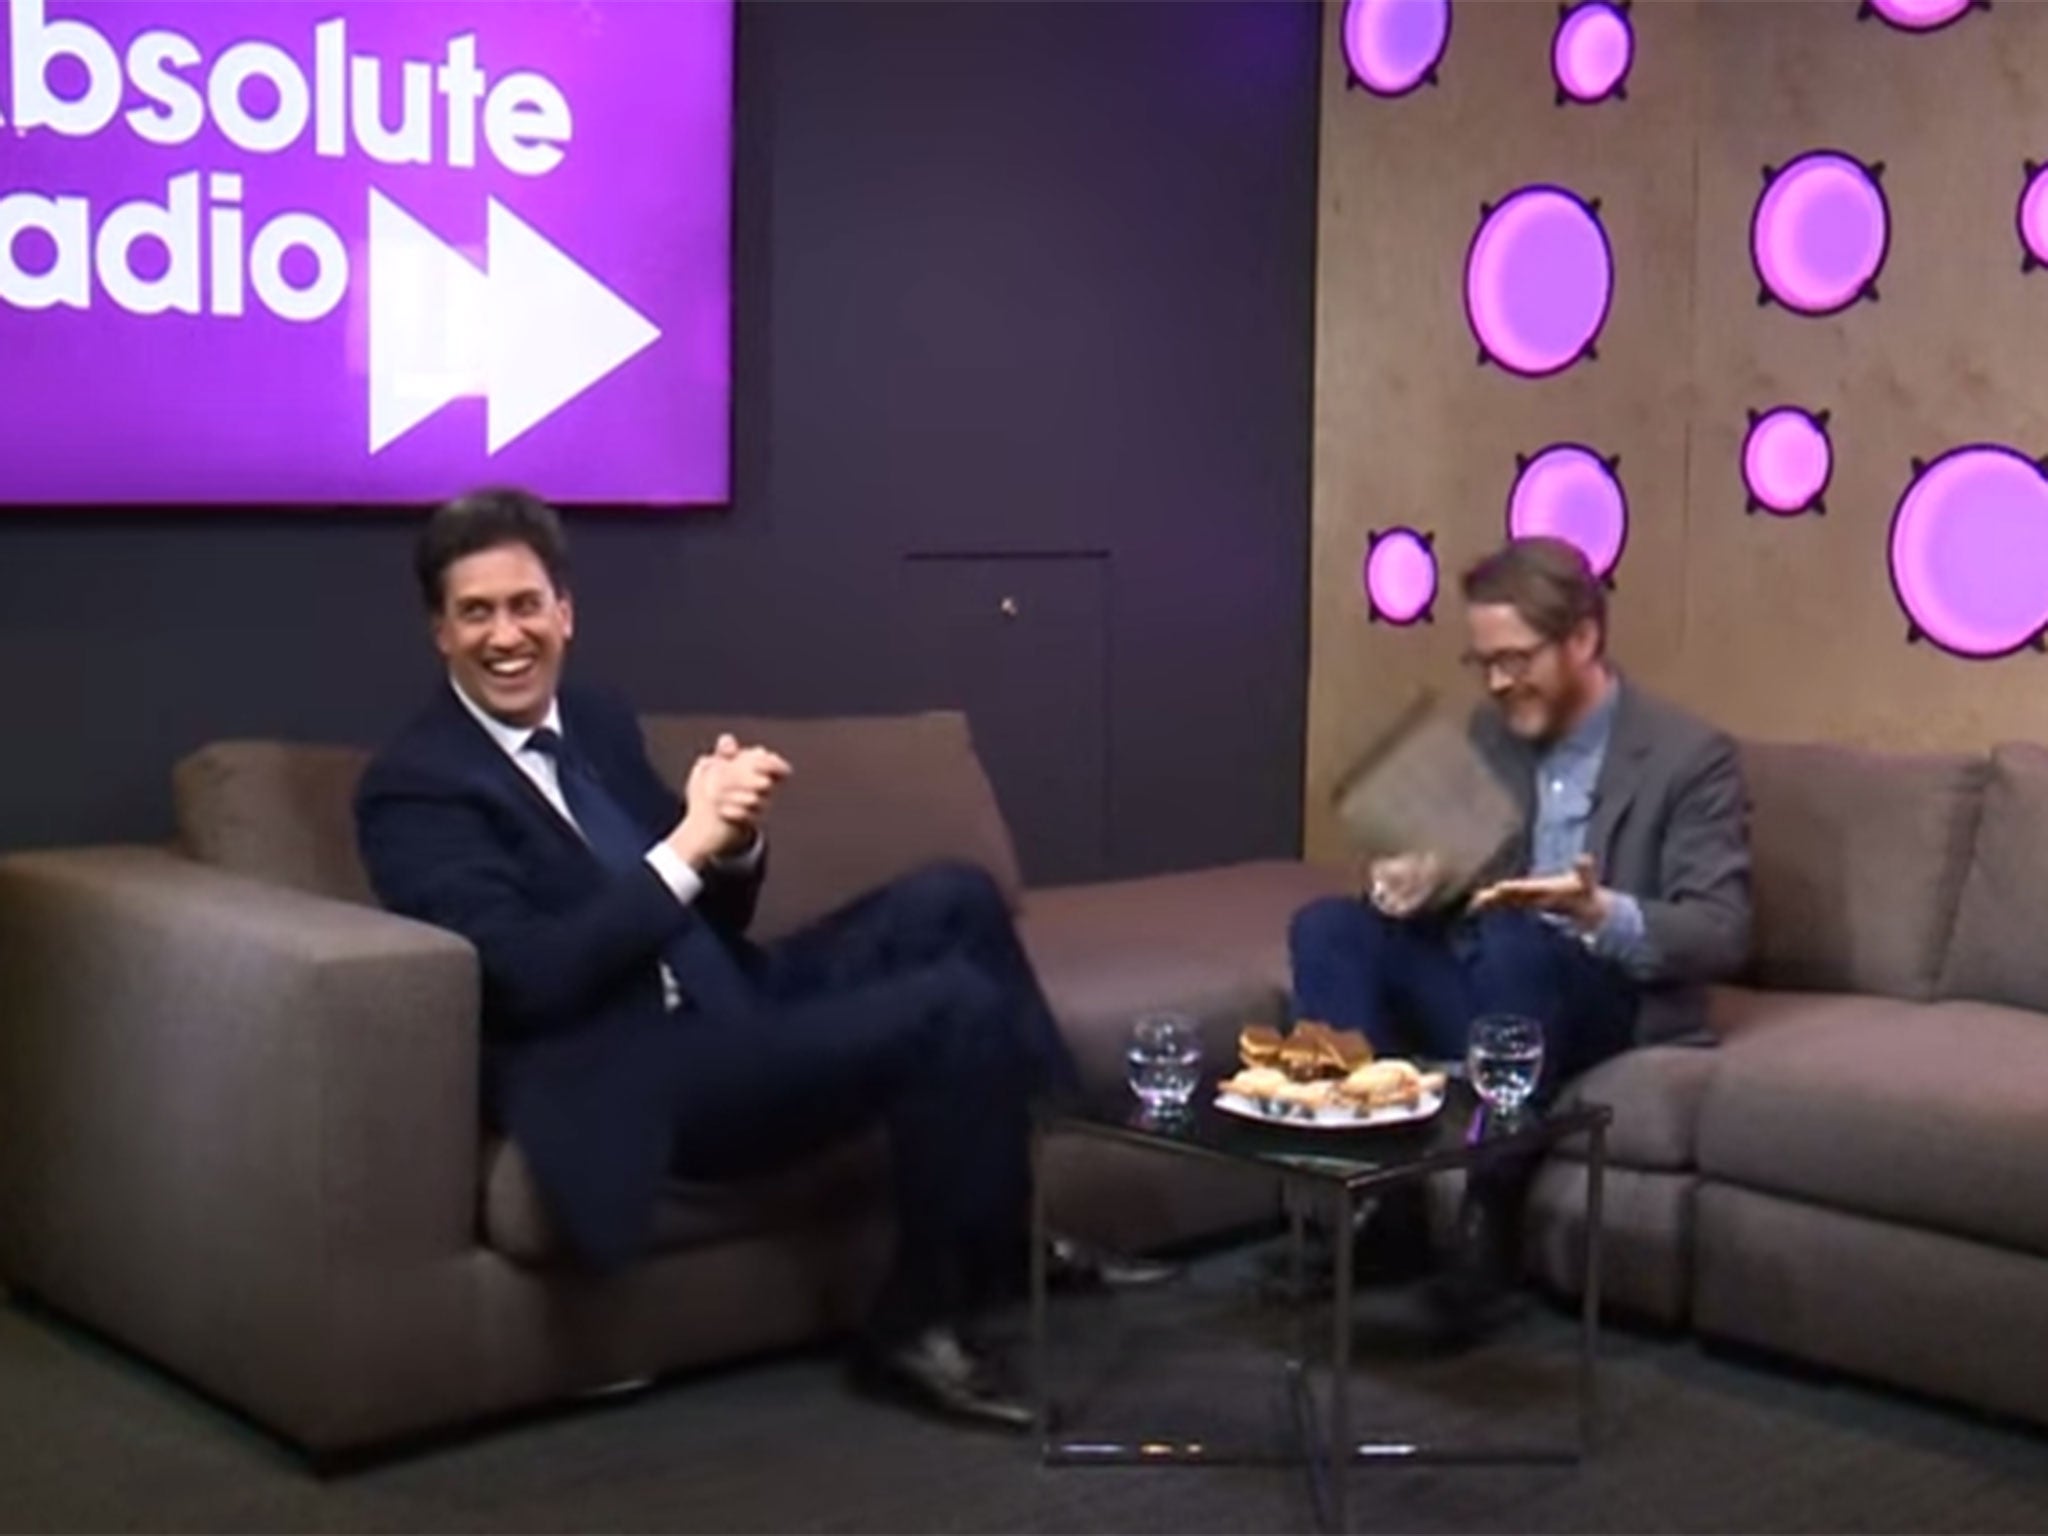 The good-natured interview included some tricky questions about Ed Miliband's policies on immigration and history with brother David, which he fielded comfortably